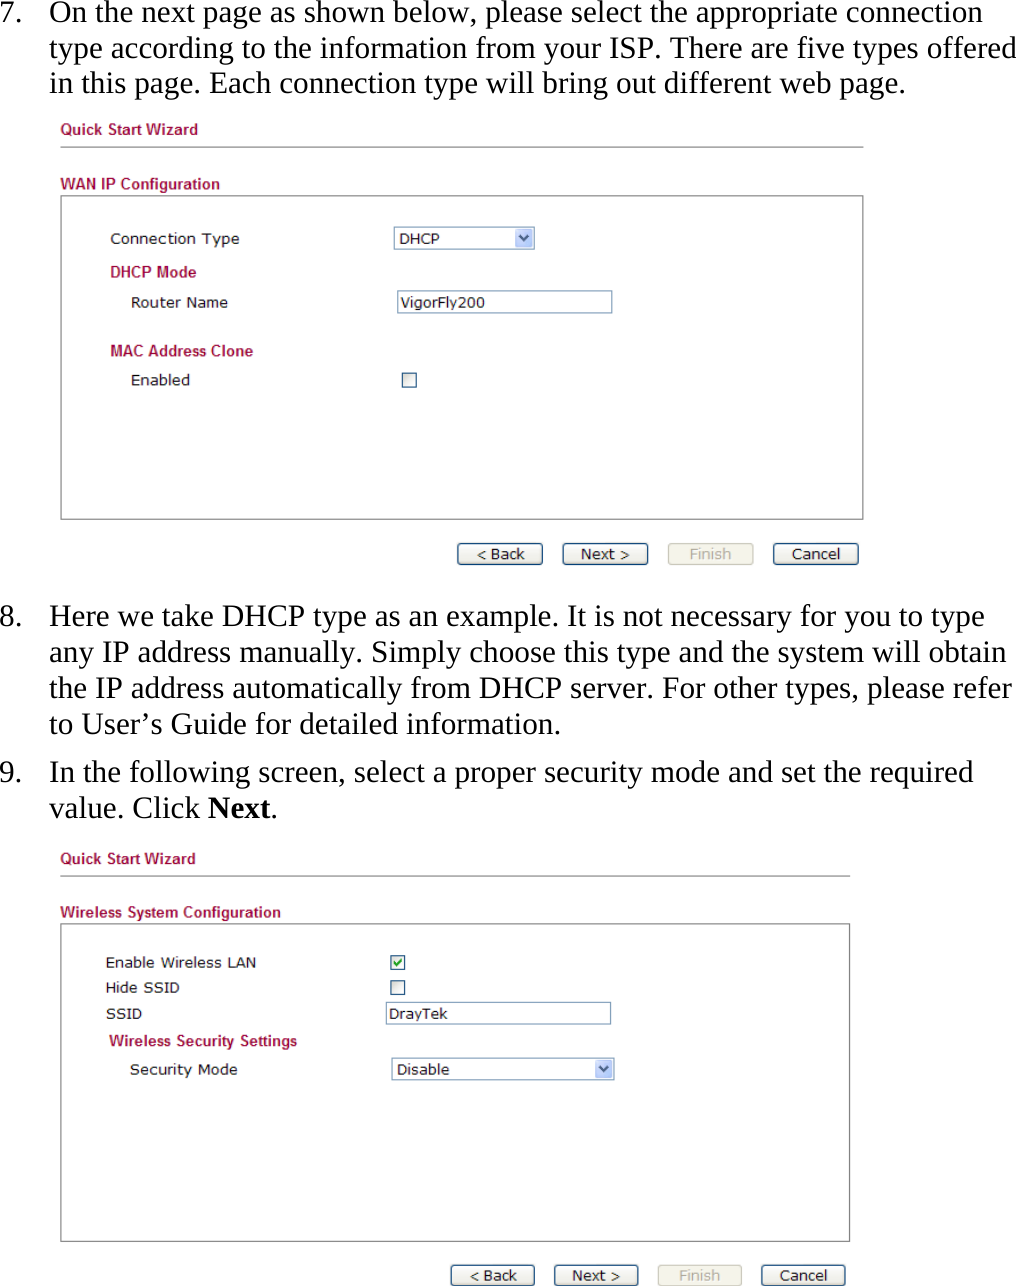   7. On the next page as shown below, please select the appropriate connection type according to the information from your ISP. There are five types offered in this page. Each connection type will bring out different web page.  8. Here we take DHCP type as an example. It is not necessary for you to type any IP address manually. Simply choose this type and the system will obtain the IP address automatically from DHCP server. For other types, please refer to User’s Guide for detailed information. 9. In the following screen, select a proper security mode and set the required value. Click Next.  